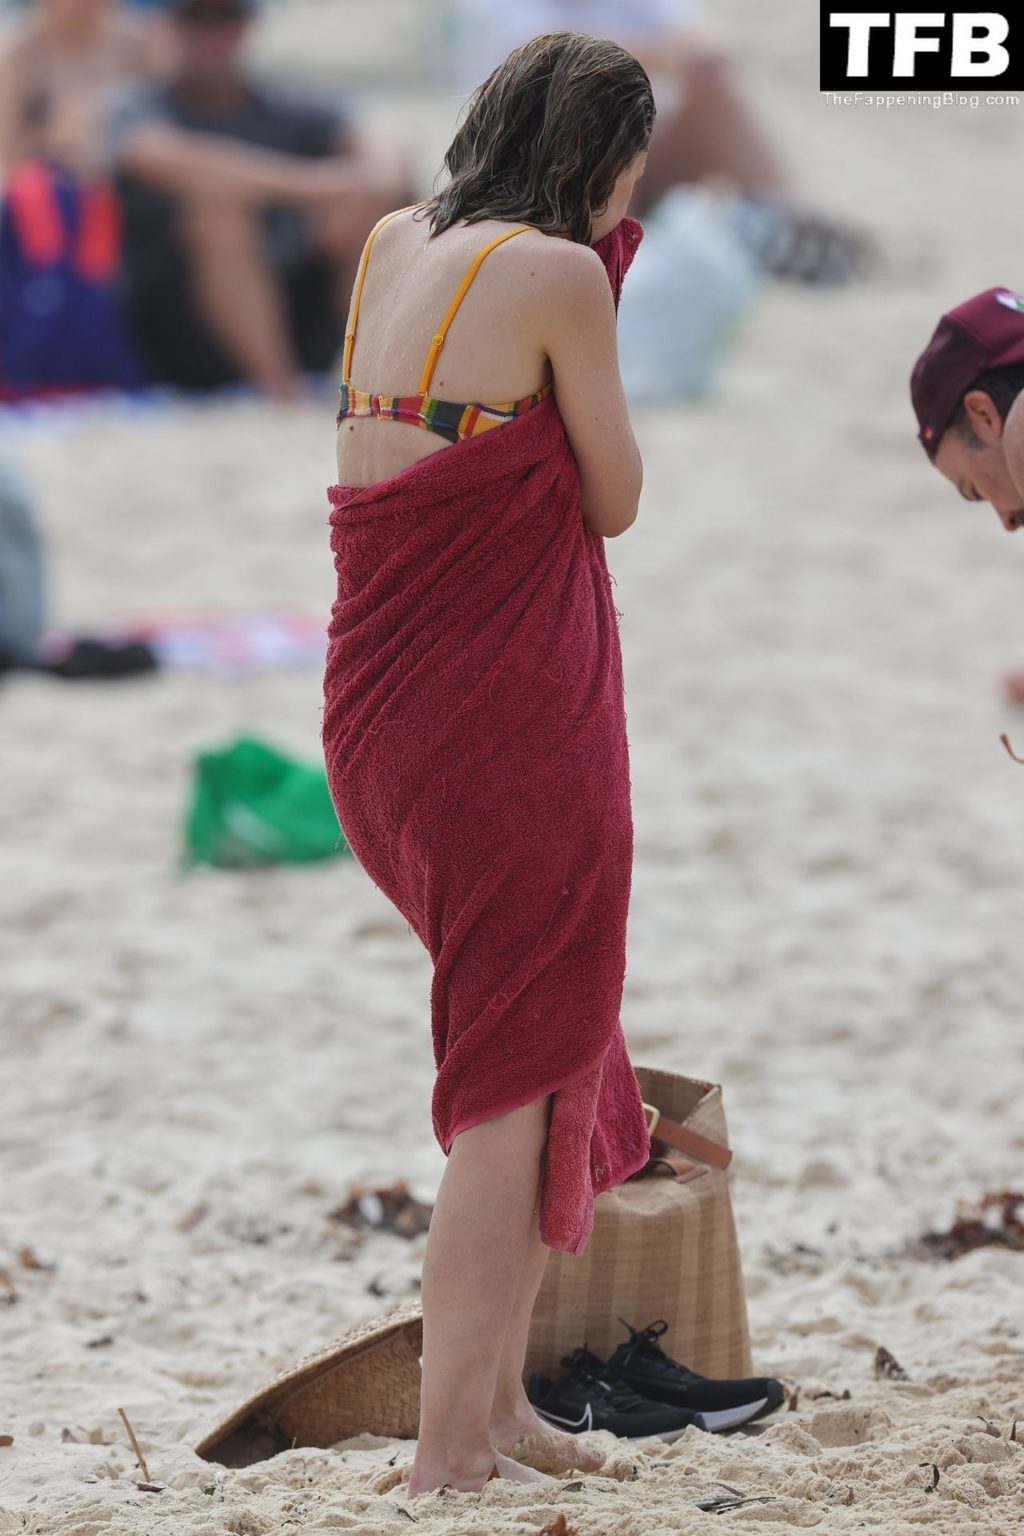 Rose Byrne Sexy The Fappening Blog 84 1024x1536 - Rose Byrne & Kick Gurry Enjoy a Day on the Beach in Sydney (90 Photos)